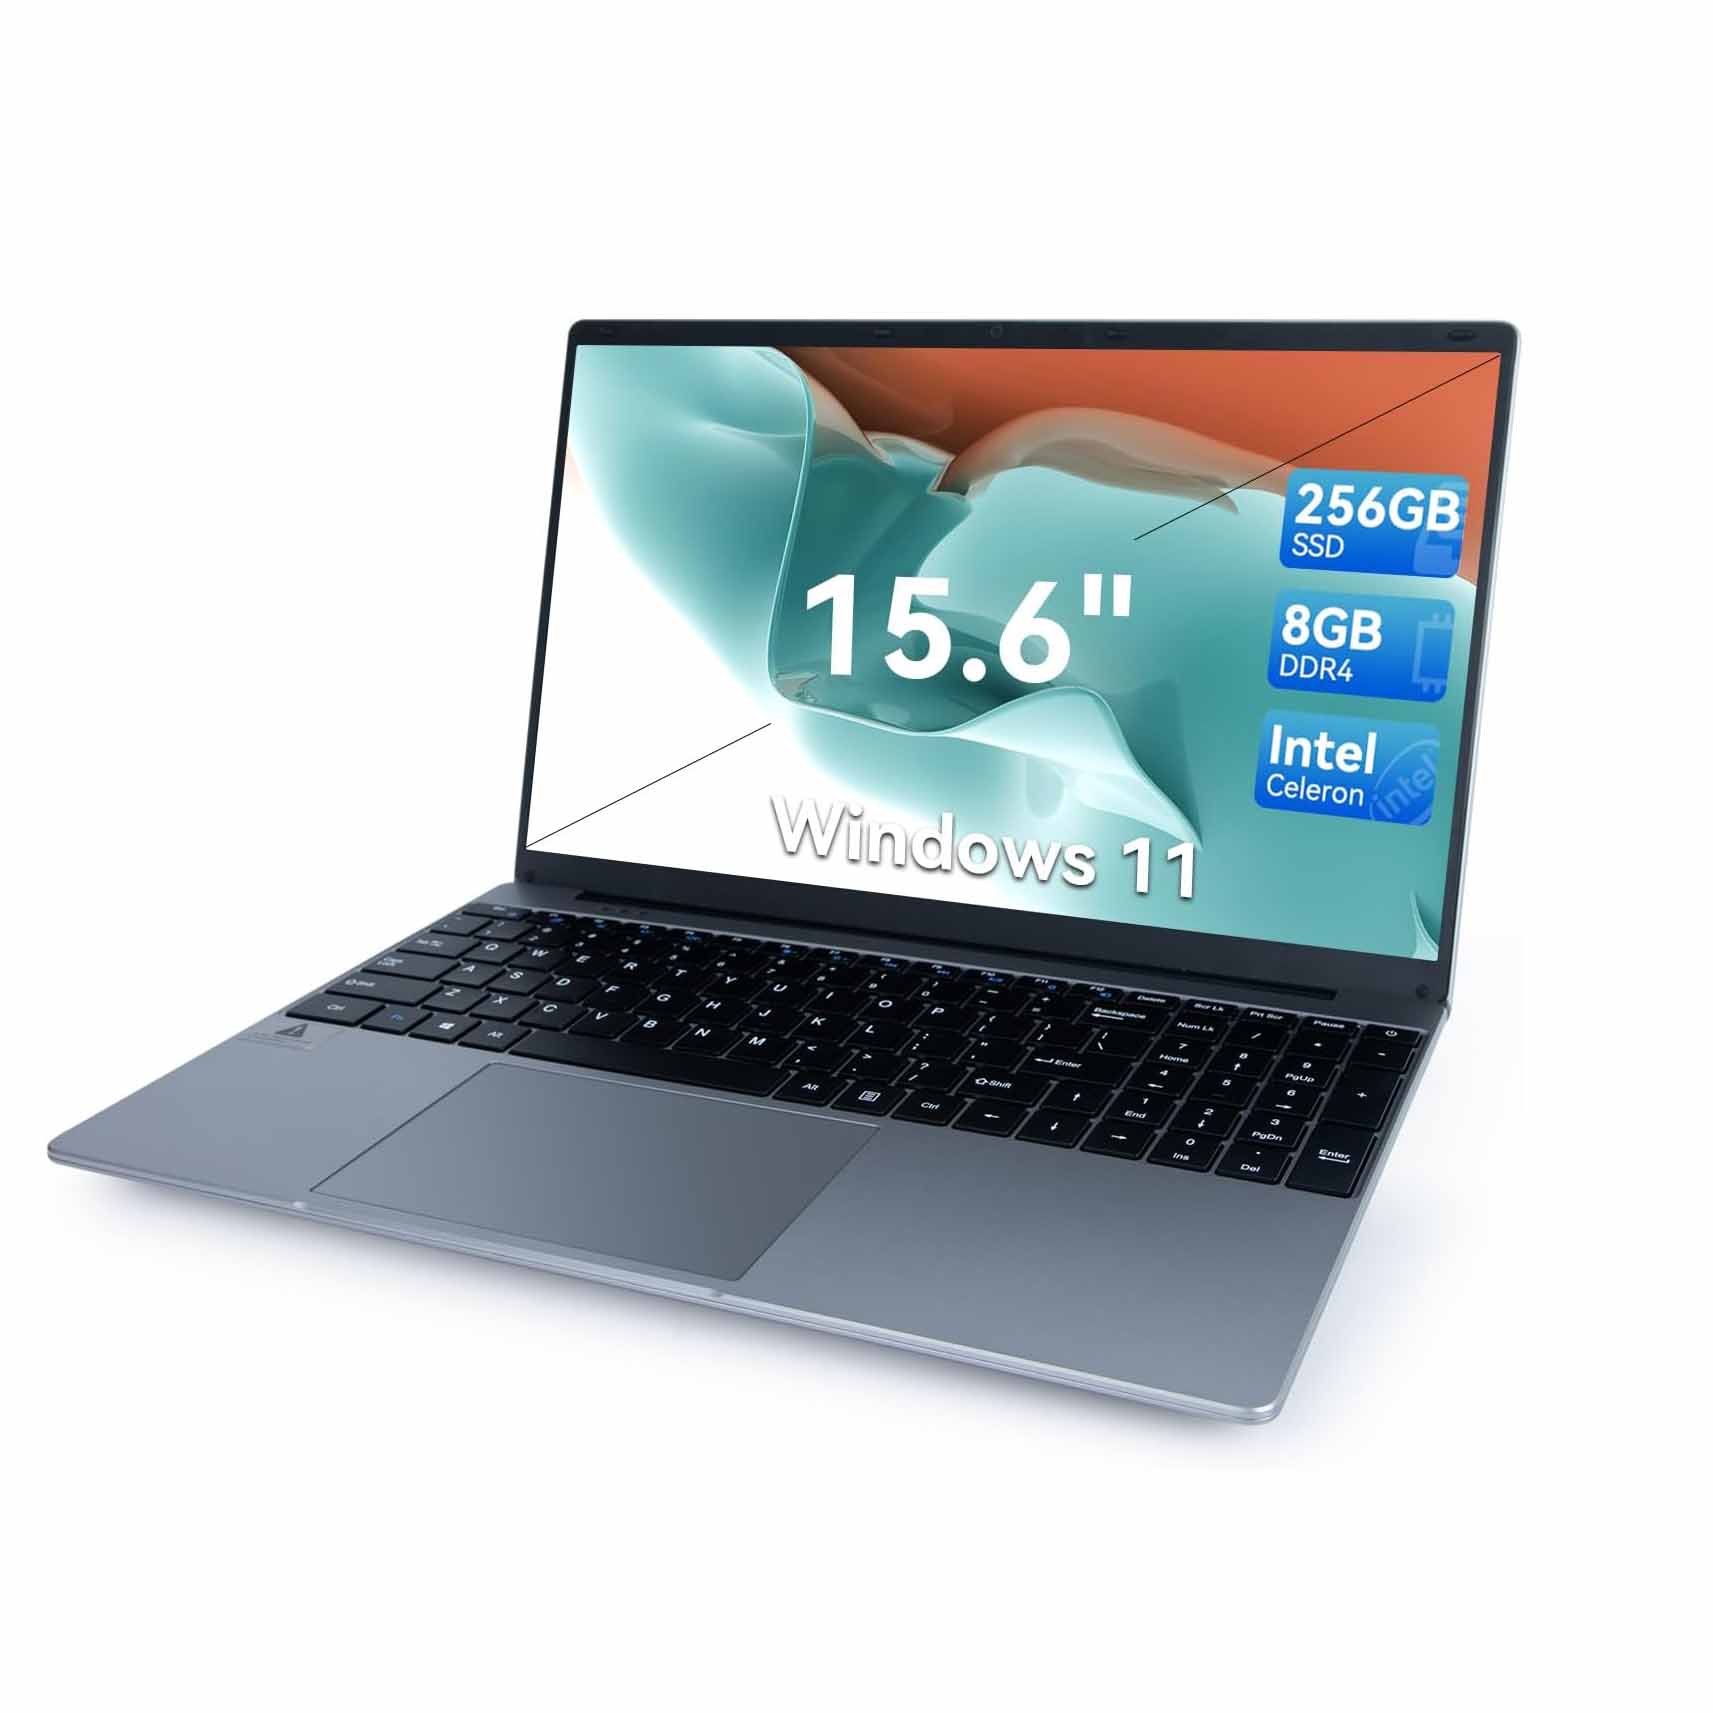 ANMESC 15.6 inch Laptop Computer with blue and orange display screen